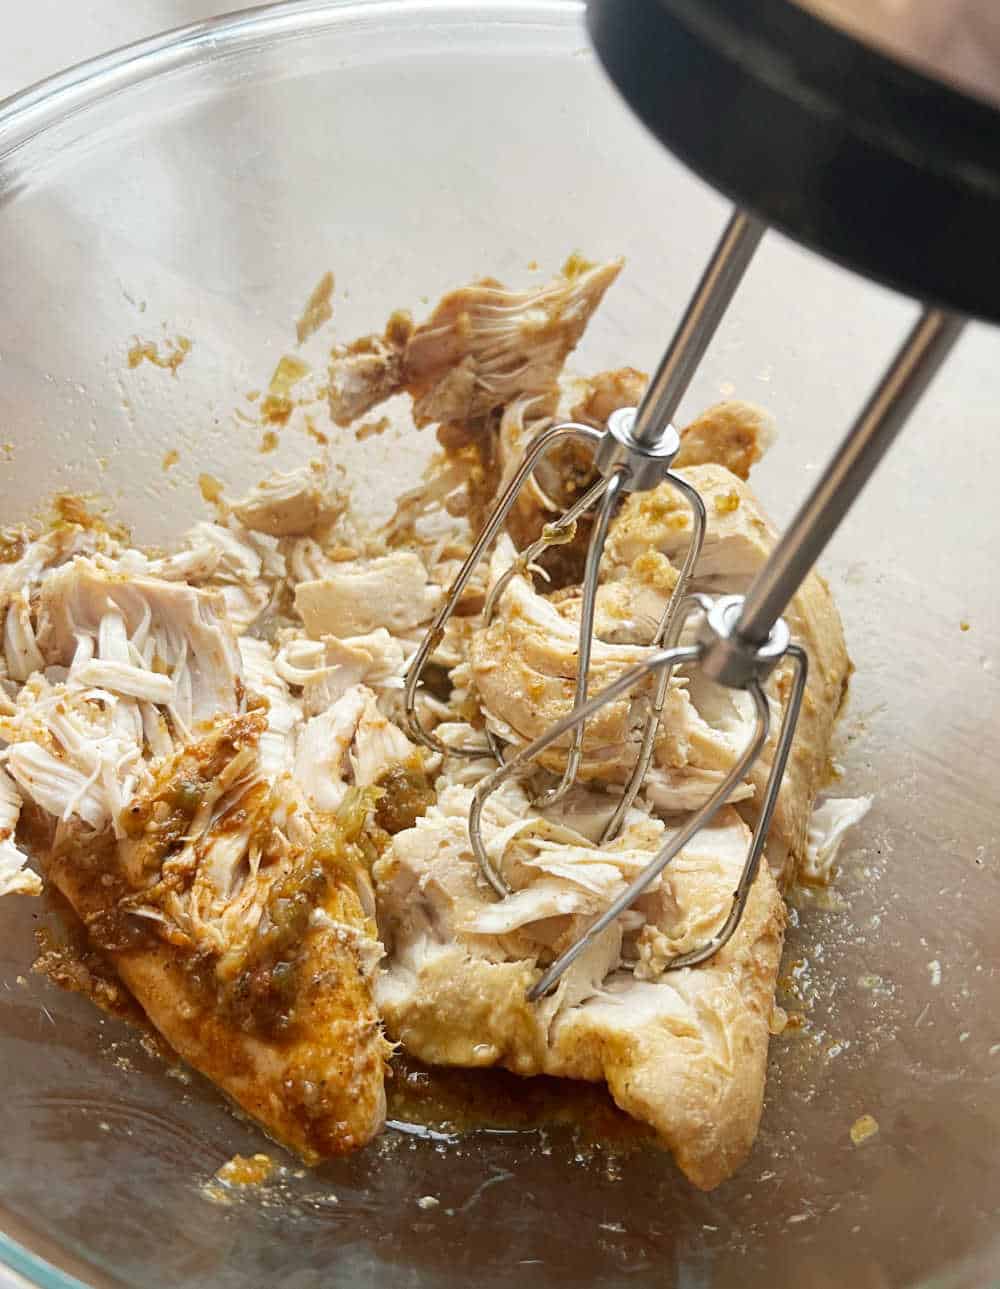 shred chicken with hand mixer in mixing bowl.